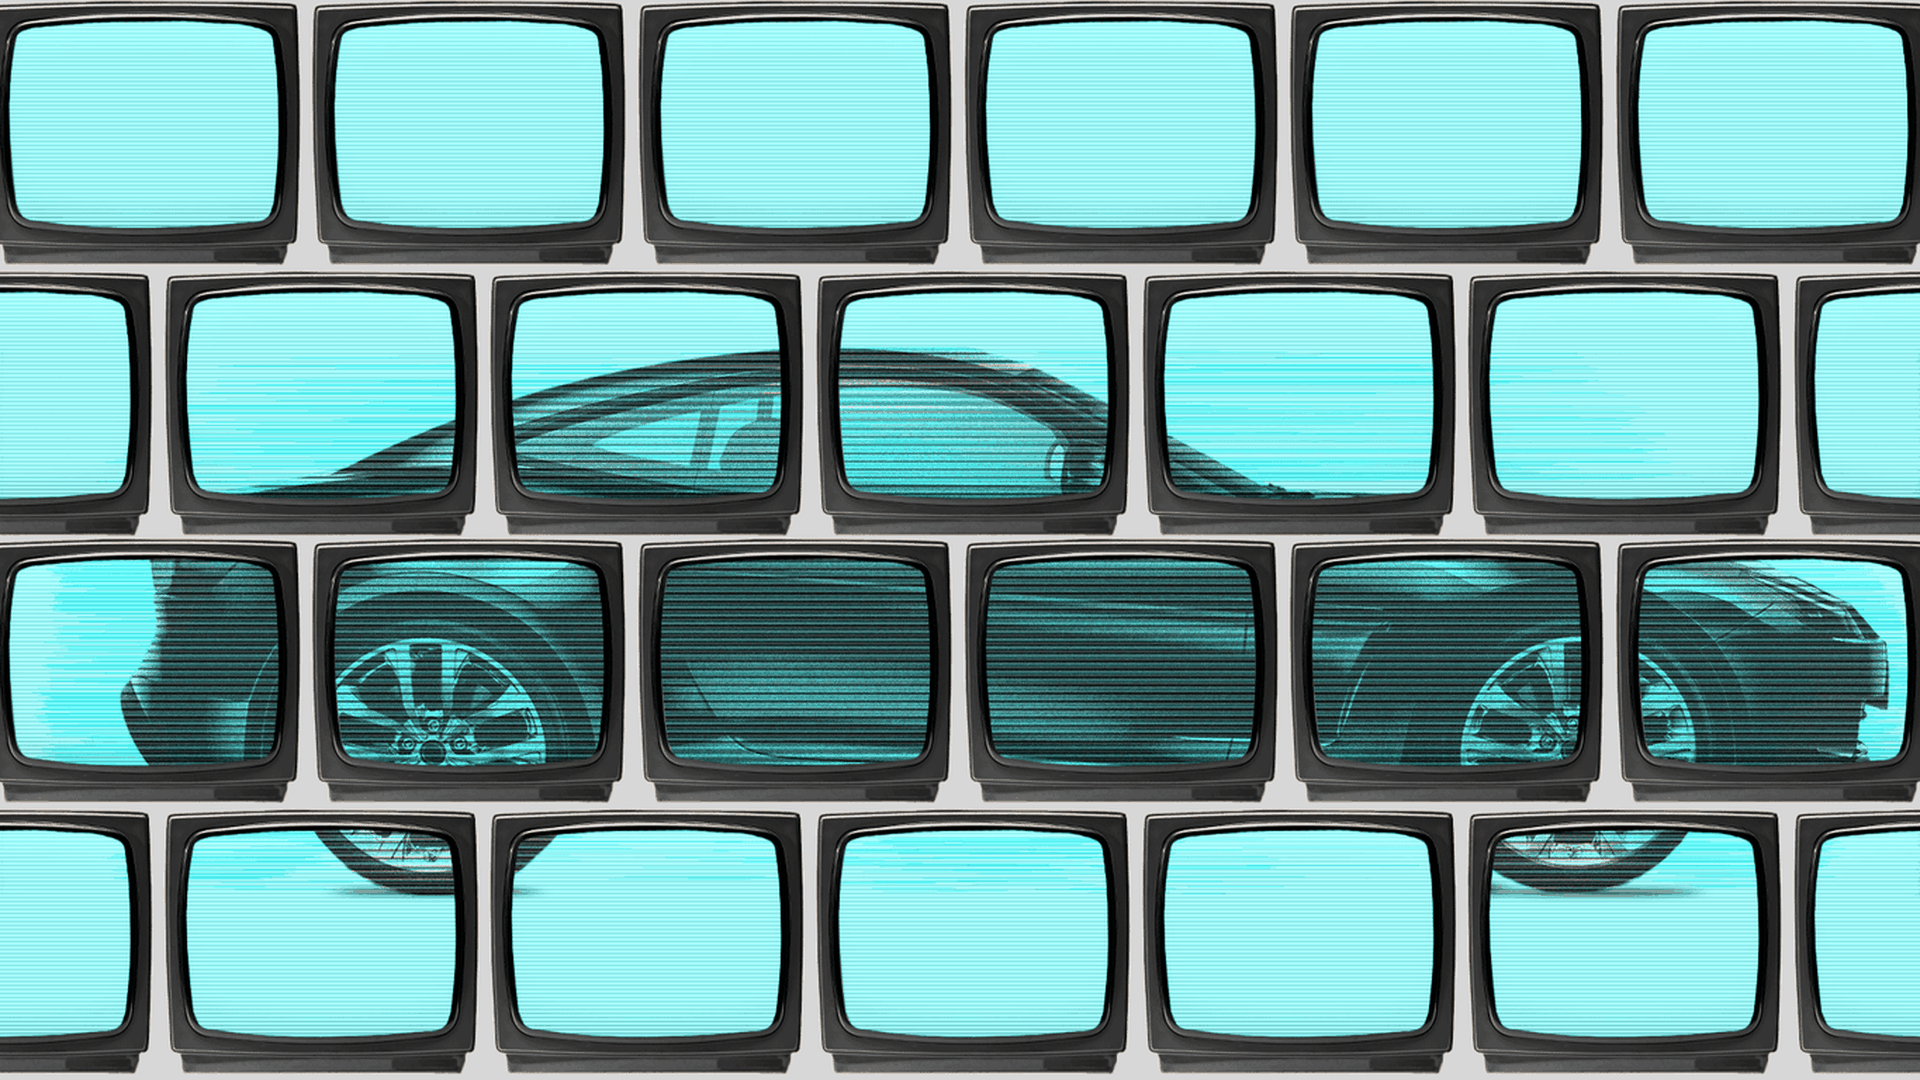 Illustration of a car, seen through a series of television screens